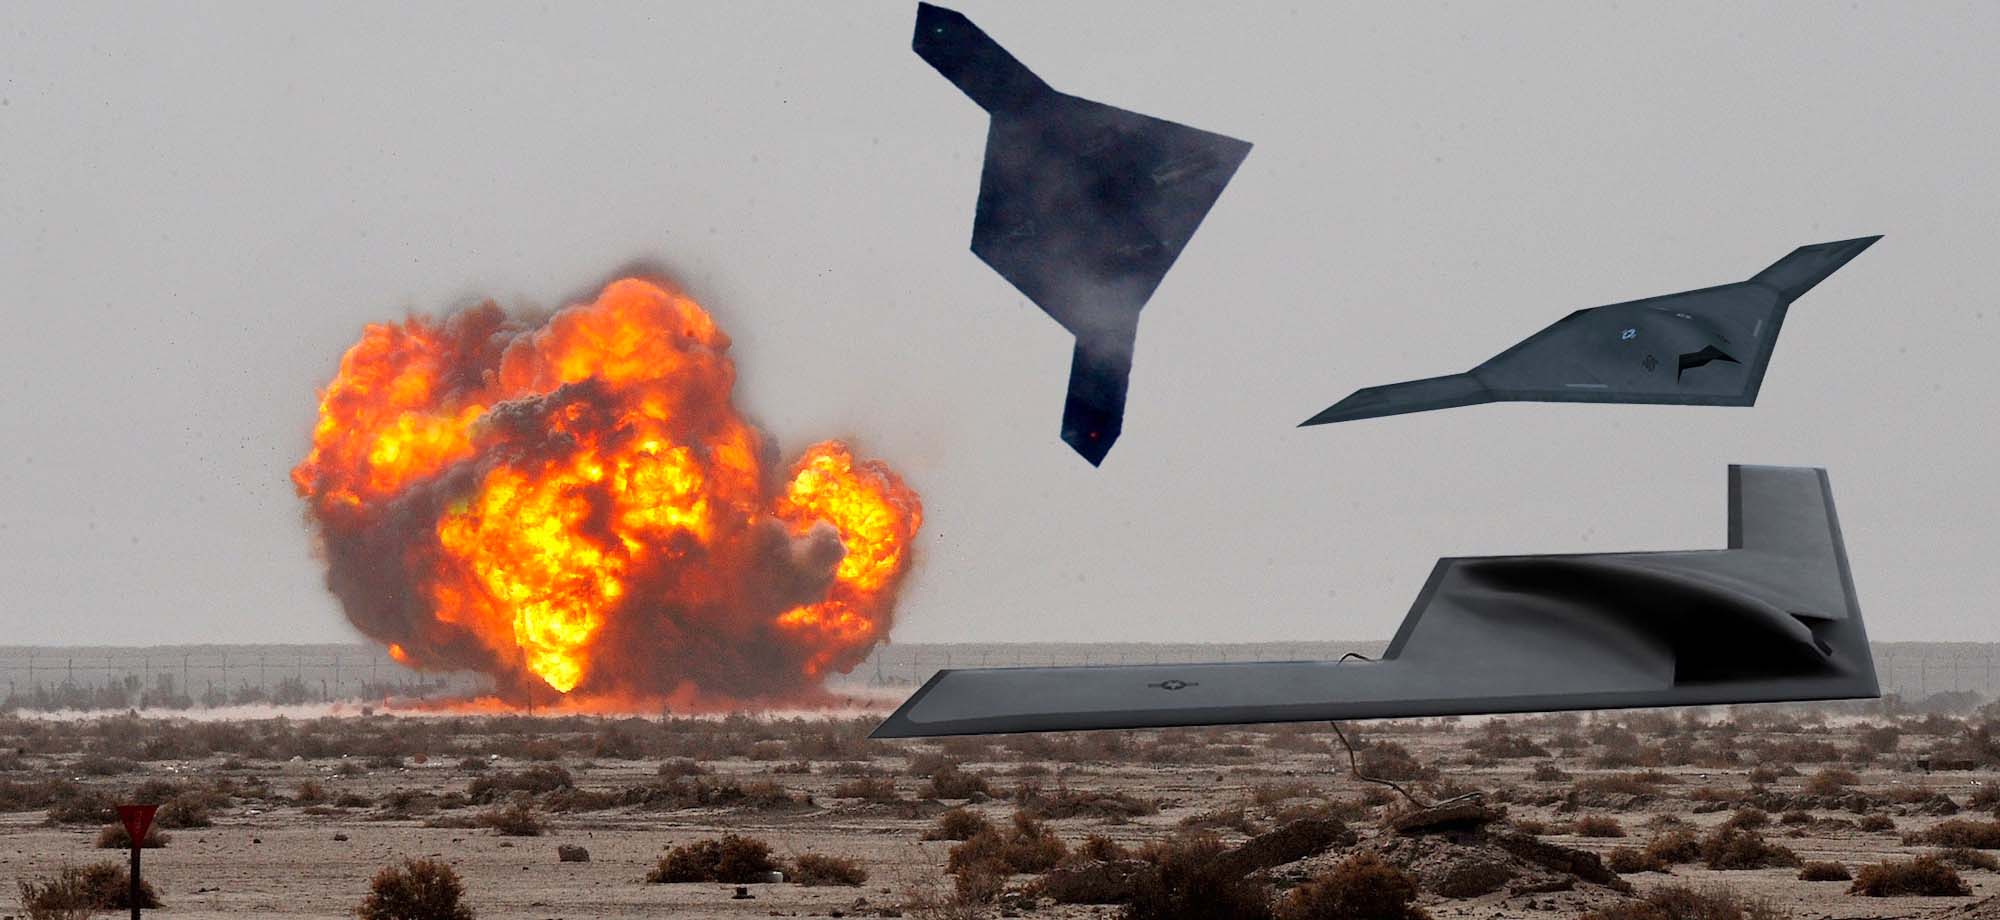 Everything we know about the Air Force's new drone stealth bomber effort - Sandboxx